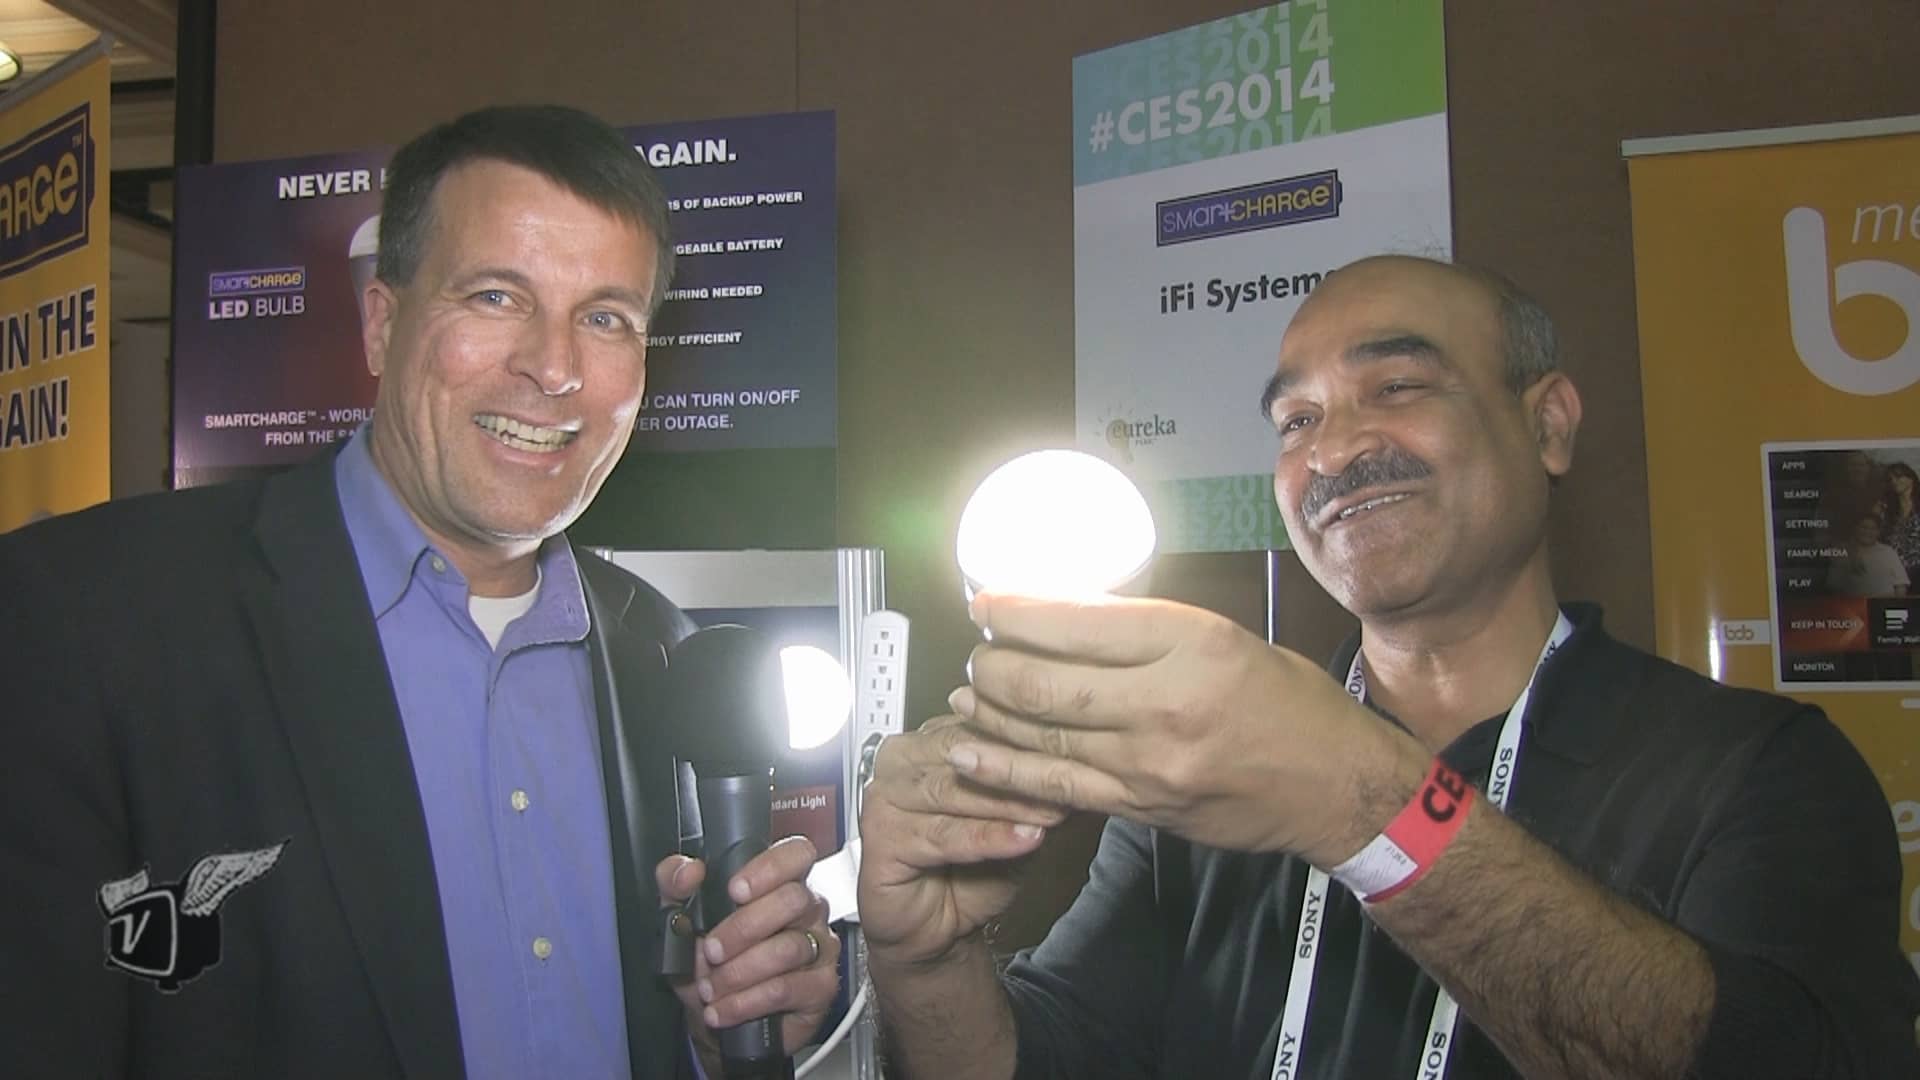 Visions of Uncle Fester – A Light Bulb with a Memory #CES2014